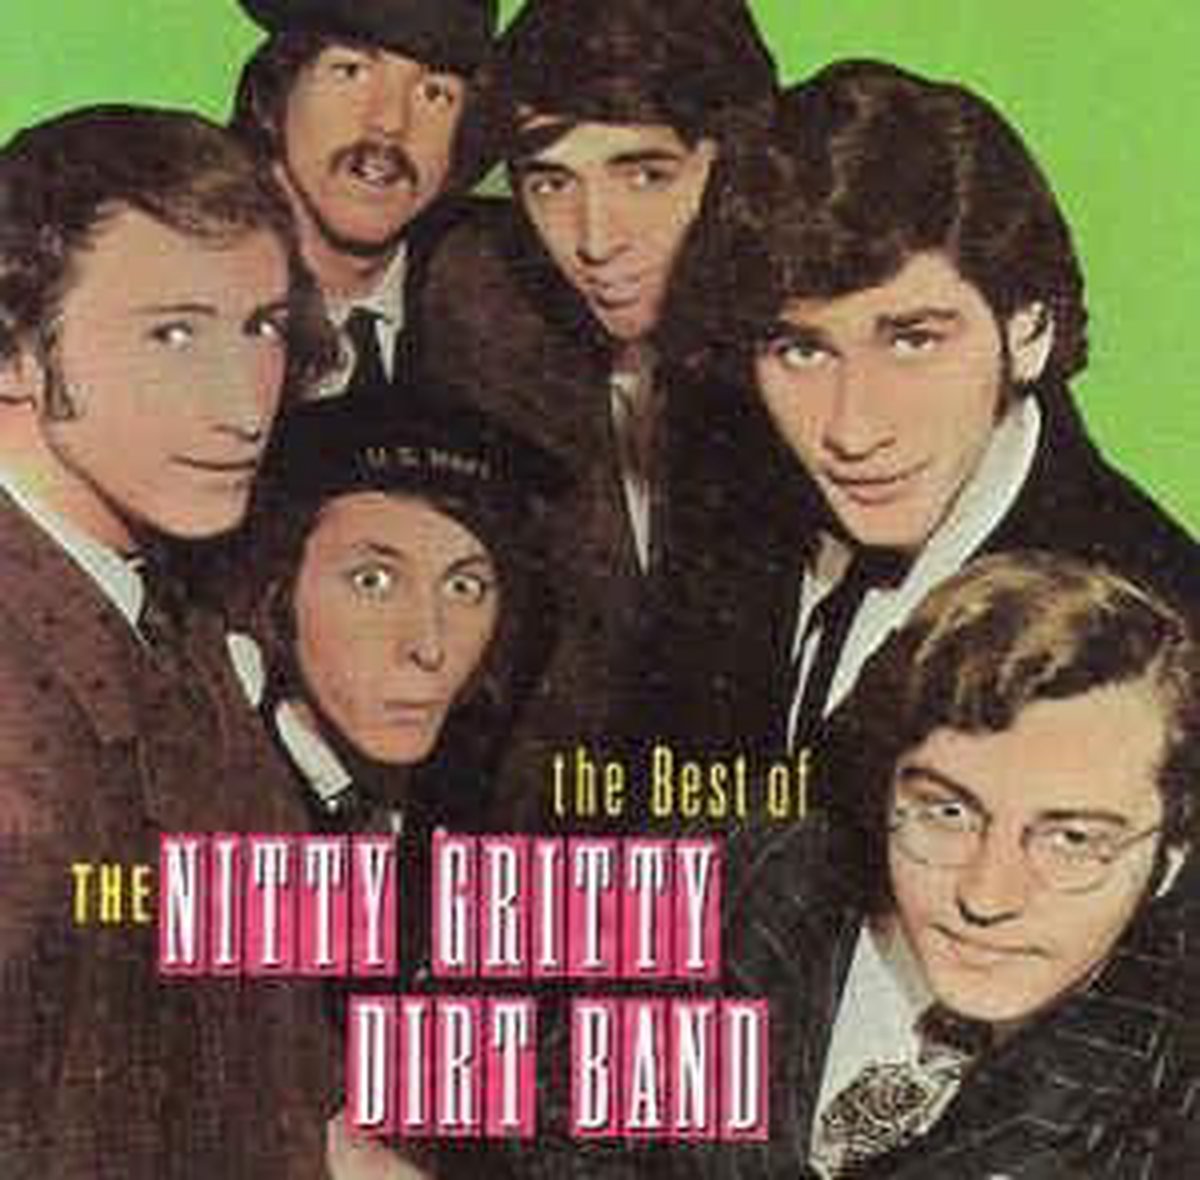 Best of the Nitty Gritty Dirt Band [Capitol/EMI] - The Nitty Gritty Dirt Band